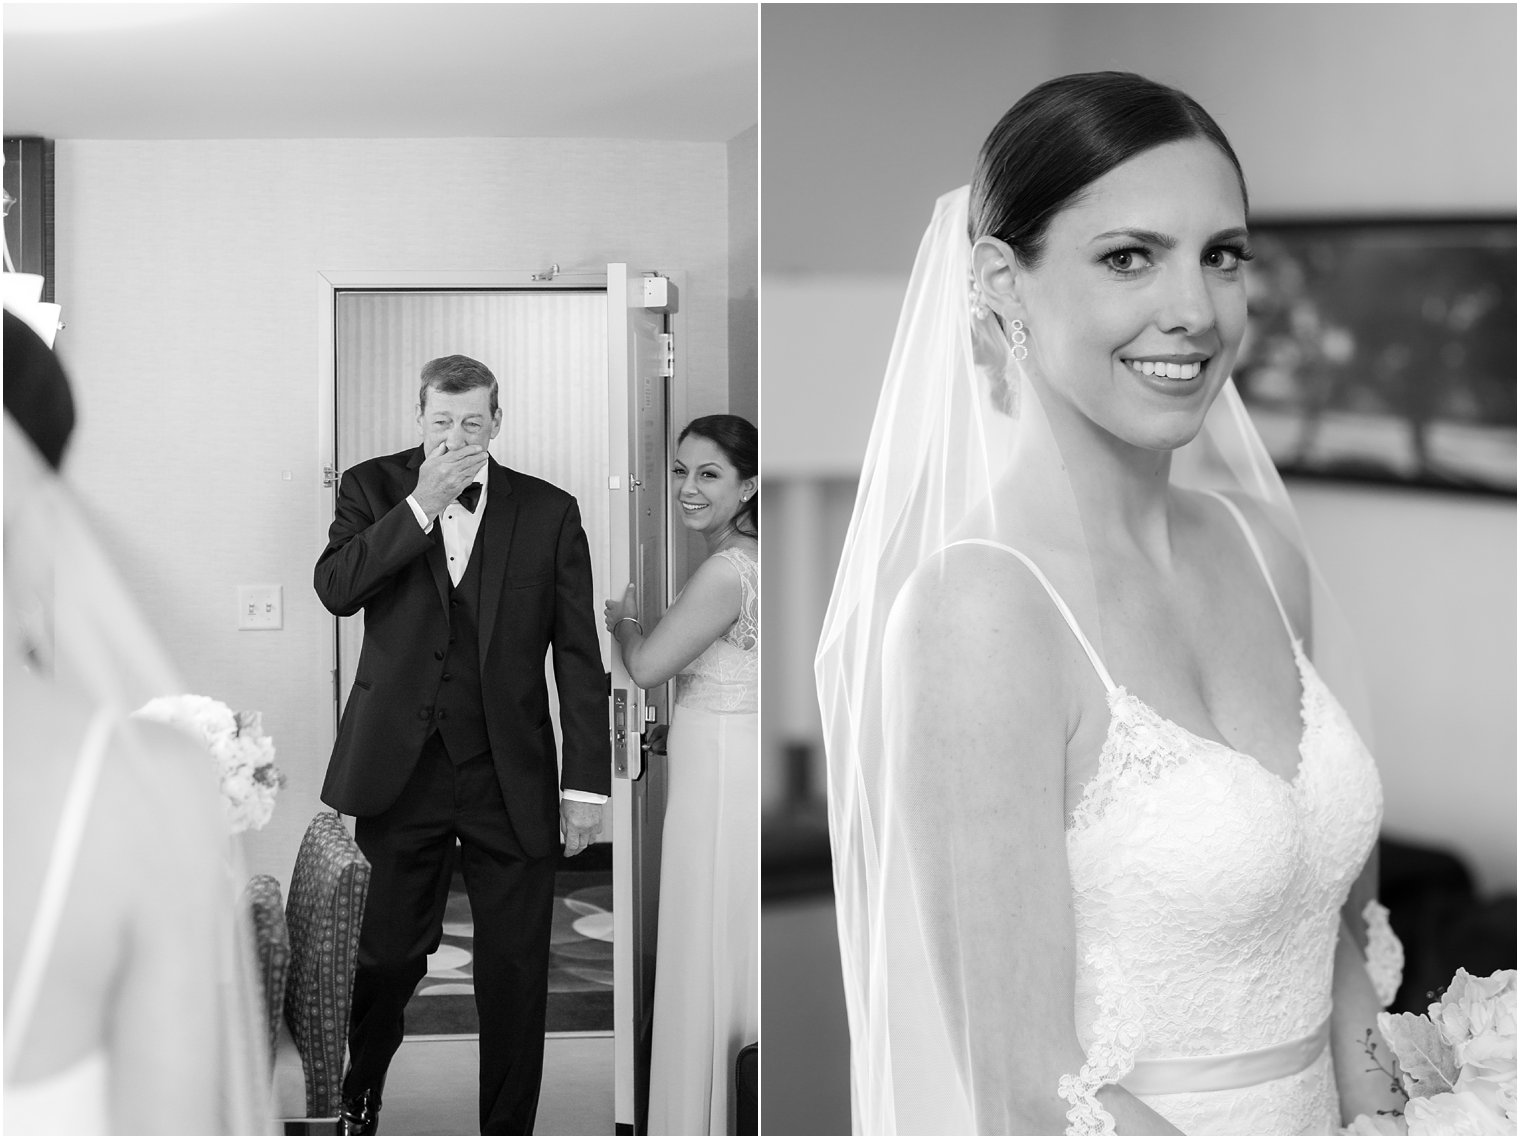 Daddy daughter first look | Photos by Idalia Photography